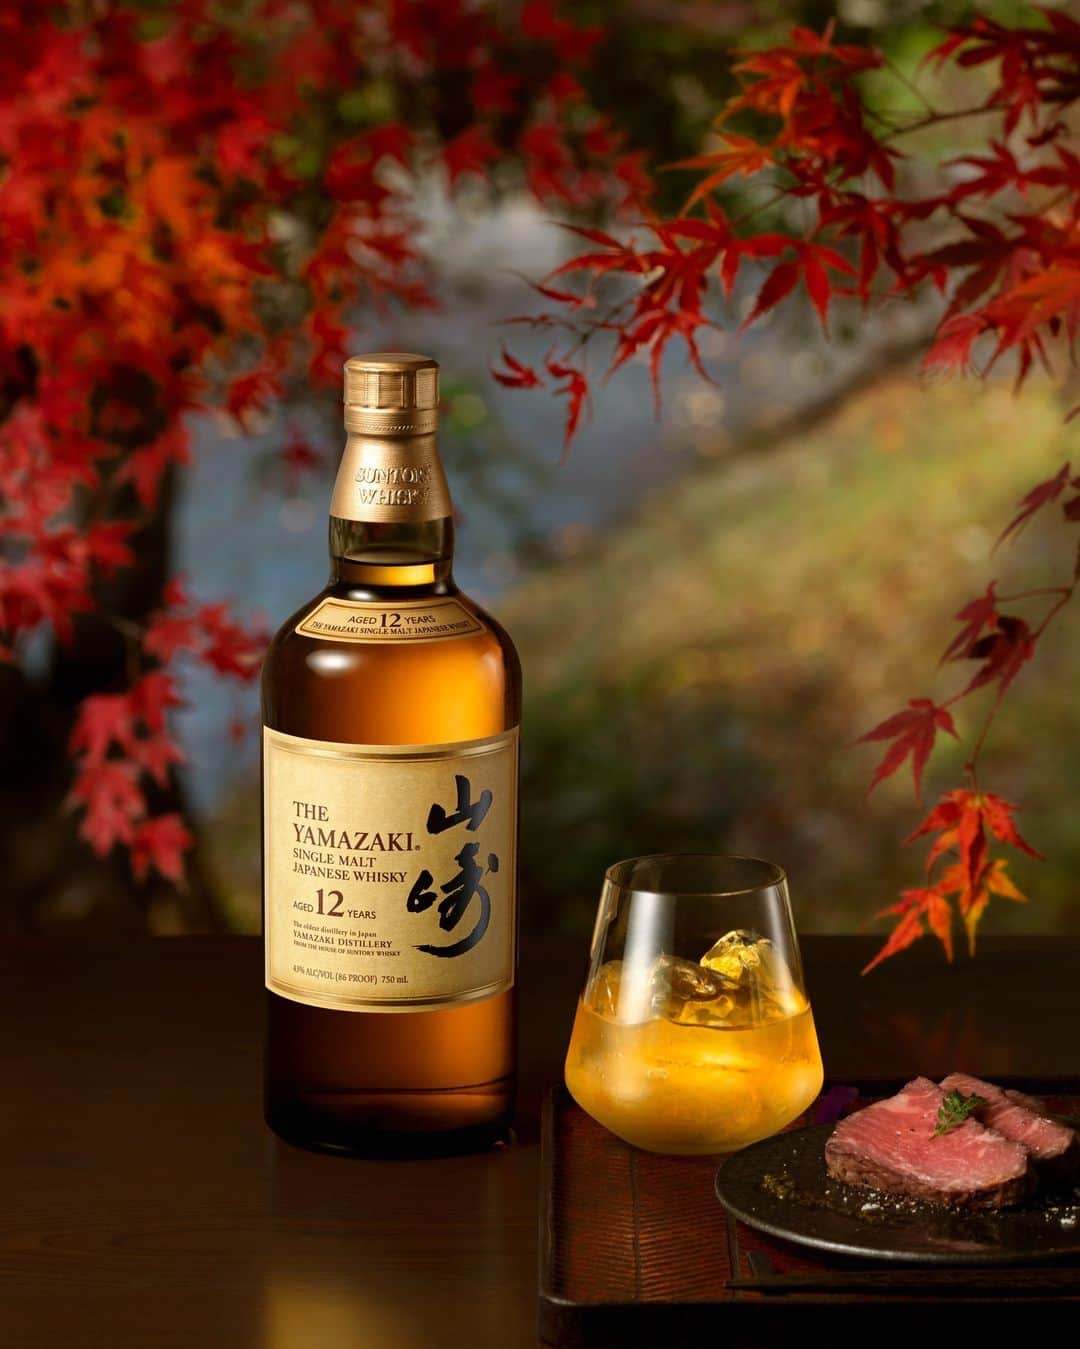 Suntory Whiskyのインスタグラム：「A long finish of sweet ginger and cinnamon, with a palate of coconut, cranberry and butter makes the Yamazaki 12 single malt whisky an impressive compliment to any meat dish.⁣ ⁣ #SuntoryTime #HouseofSuntory #SuntoryWhisky #JapaneseWhisky #Whisky #Yamazaki #Whiskygram #Drinkstagram」